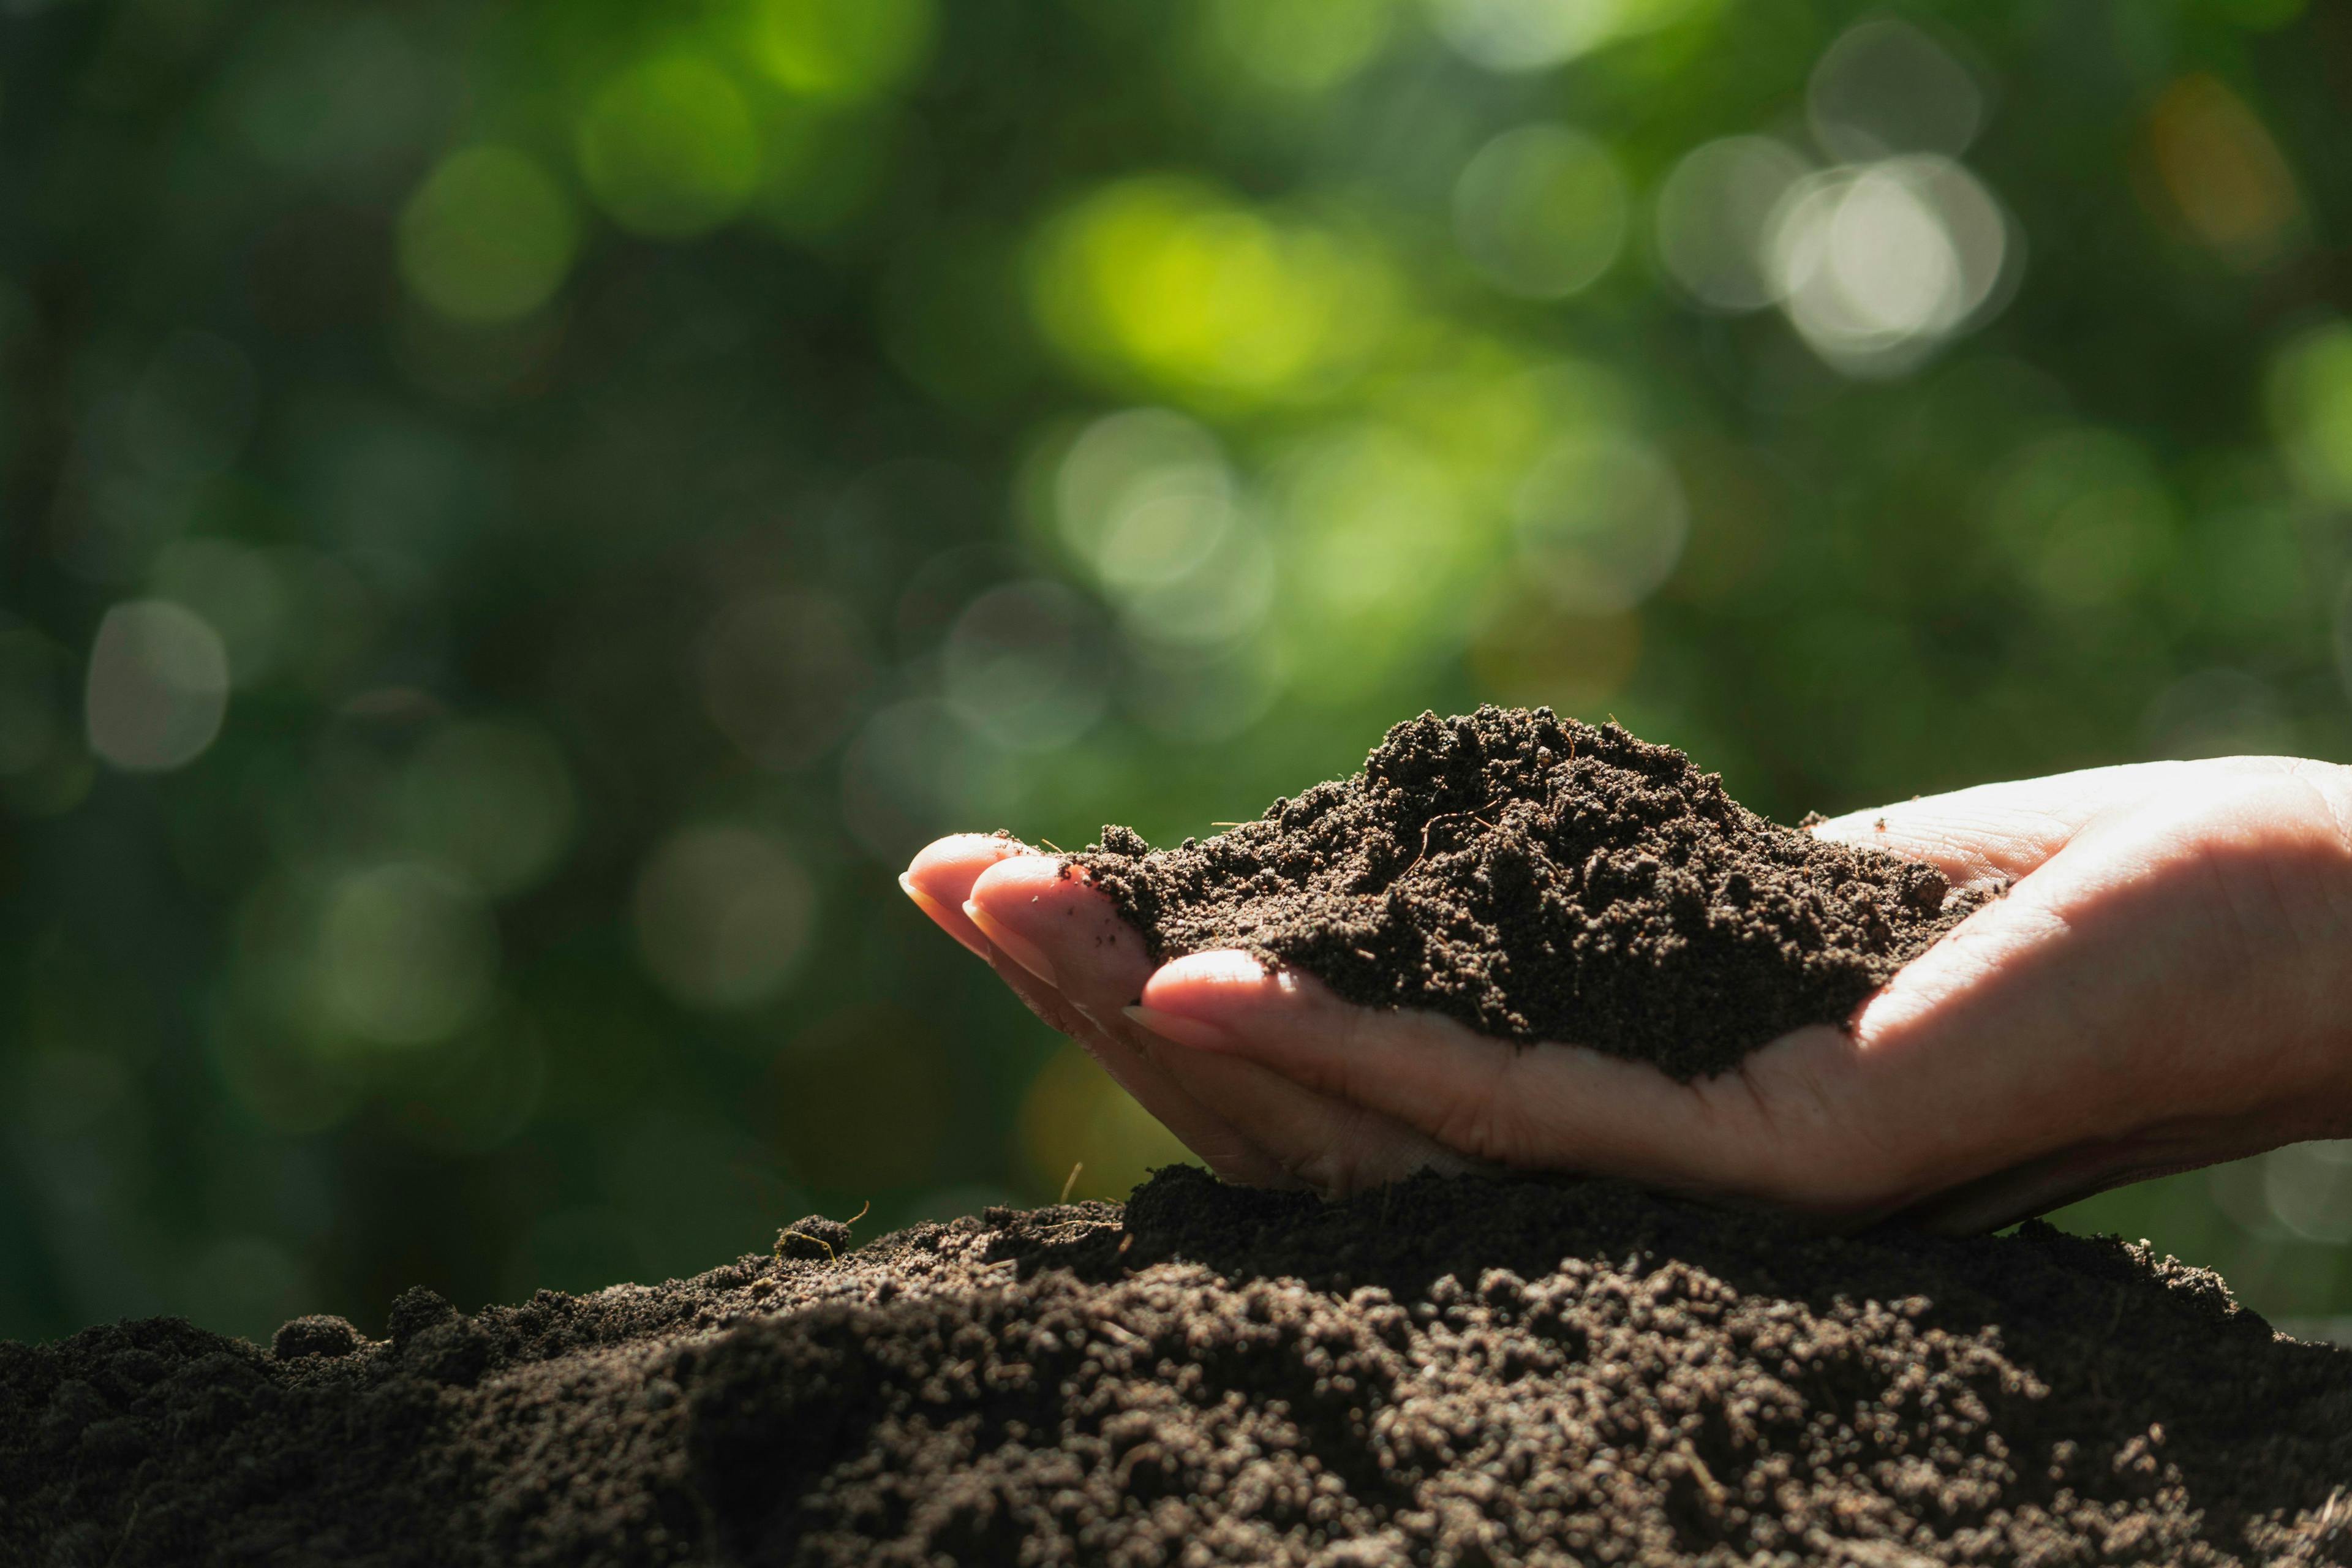 Hand of male holding soil in the hands for planting. | Image Credit: © krisana - stock.adobe.com